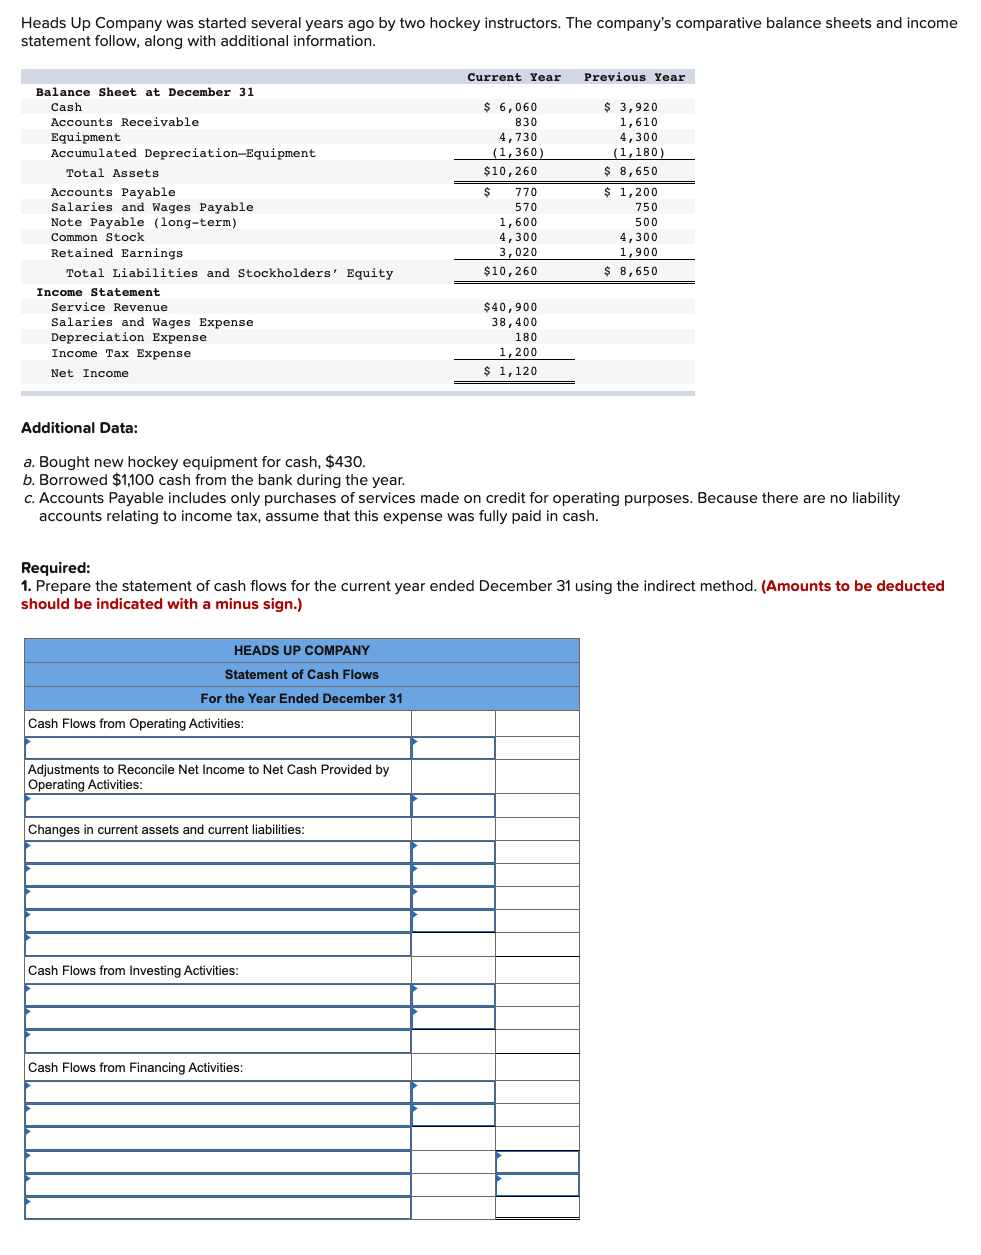 Heads Up Company was started several years ago by two hockey instructors. The company's comparative balance sheets and income
statement follow, along with additional information.
Current Year
Previous Year
Balance Sheet at December 31
$ 3,920
1,610
4,300
Cash
$ 6,060
Accounts Receivable
Equipment
Accumulated Depreciation-Equipment
830
4,730
(1,180)
$ 8,650
(1,360)
Total Assets
$10,260
$ 1,200
750
Accounts Payable
$
770
Salaries and Wages Payable
Note Payable (long-term)
Common Stock
570
1,600
500
4,300
3,020
4,300
1,900
Retained Earnings
Total Liabilities and Stockholders' Equity
$10,260
$ 8,650
Income Statement
Service Revenue
$40,900
38,400
Salaries and Wages Expense
Depreciation Expense
Income Taх Еxpense
180
1,200
Net Income
$ 1,120
Additional Data:
a. Bought new hockey equipment for cash, $430.
b. Borrowed $1,100 cash from the bank during the year.
c. Accounts Payable includes only purchases of services made on credit for operating purposes. Because there are no liability
accounts relating to income tax, assume that this expense was fully paid in cash.
Required:
1. Prepare the statement of cash flows for the current year ended December 31 using the indirect method. (Amounts to be deducted
should be indicated with a minus sign.)
HEADS UP COMPANY
Statement of Cash Flows
For the Year Ended December 31
Cash Flows from Operating Activities:
Adjustments to Reconcile Net Income to Net Cash Provided by
Operating Activities:
Changes in current assets and current liabilities:
Cash Flows from Investing Activities:
Cash Flows from Financing Activities:
